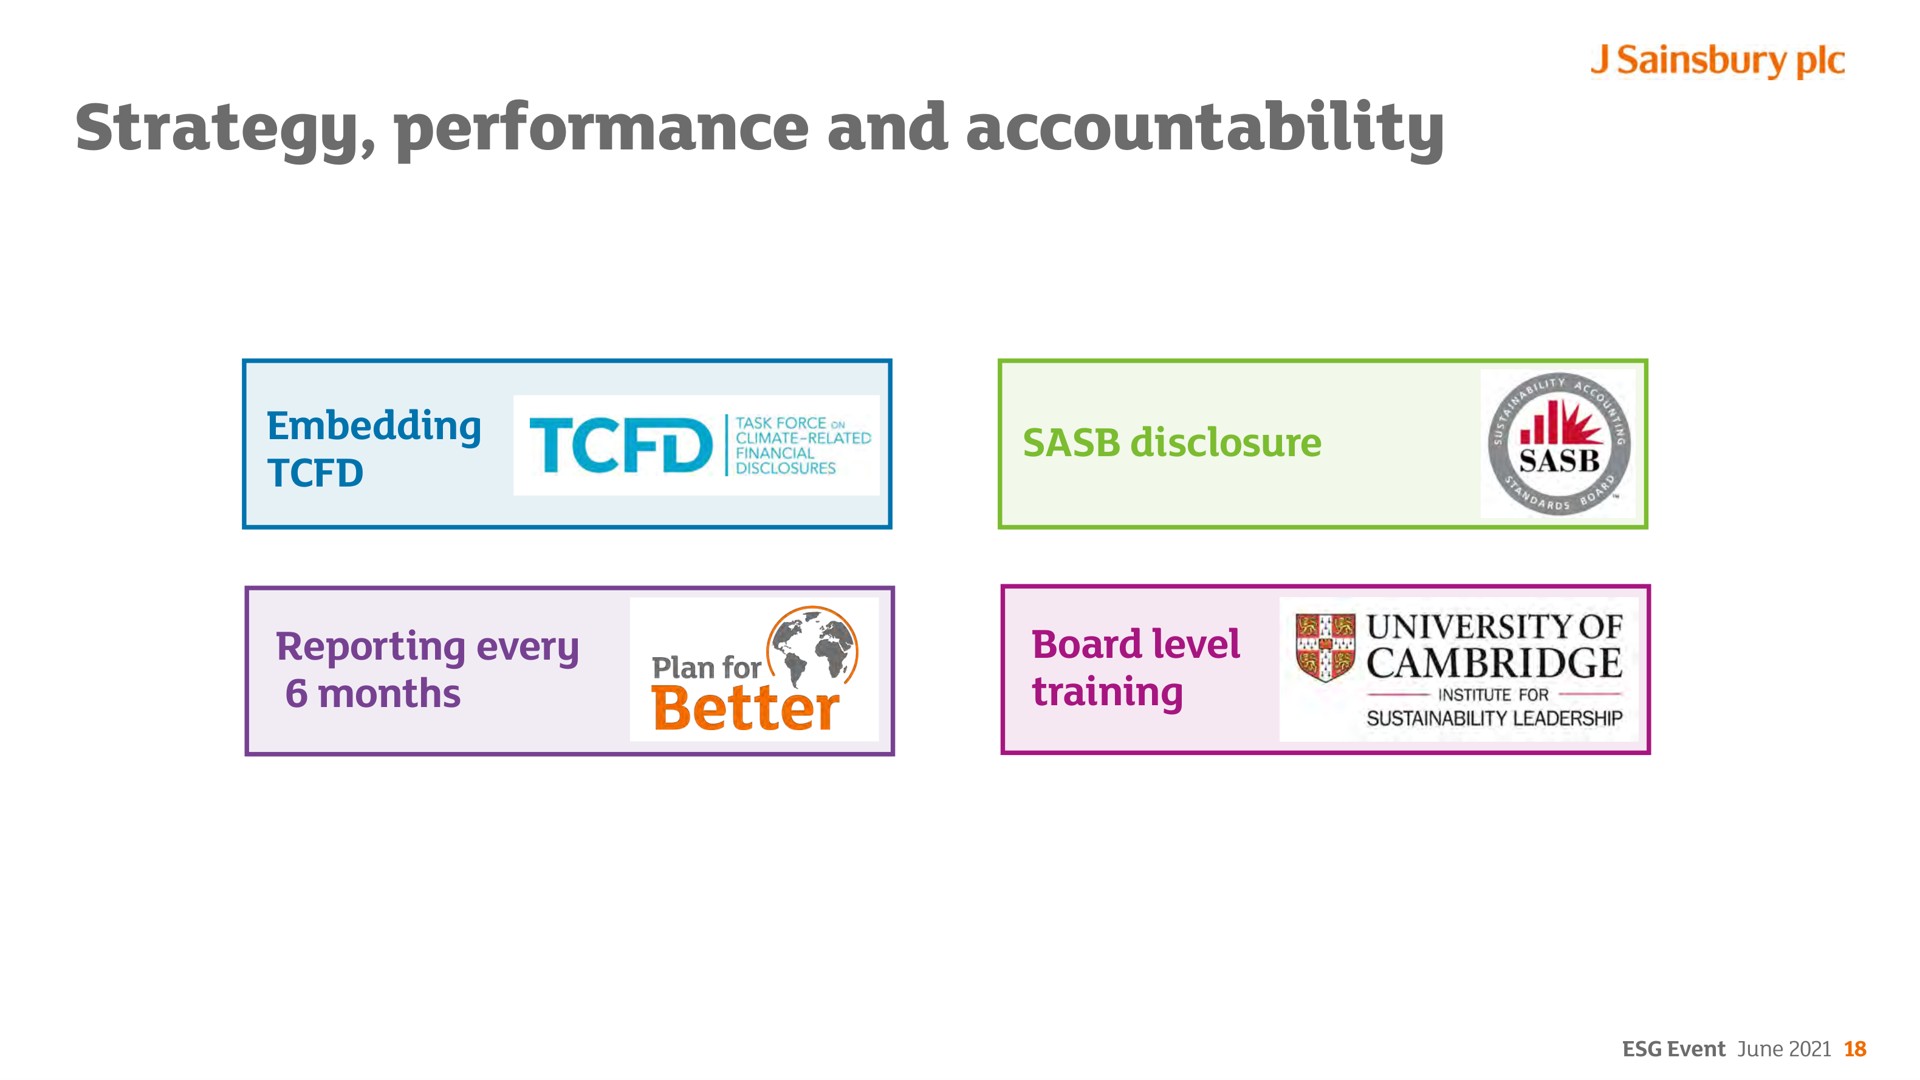 strategy performance and accountability veep reporting every pian board level | Sainsbury's